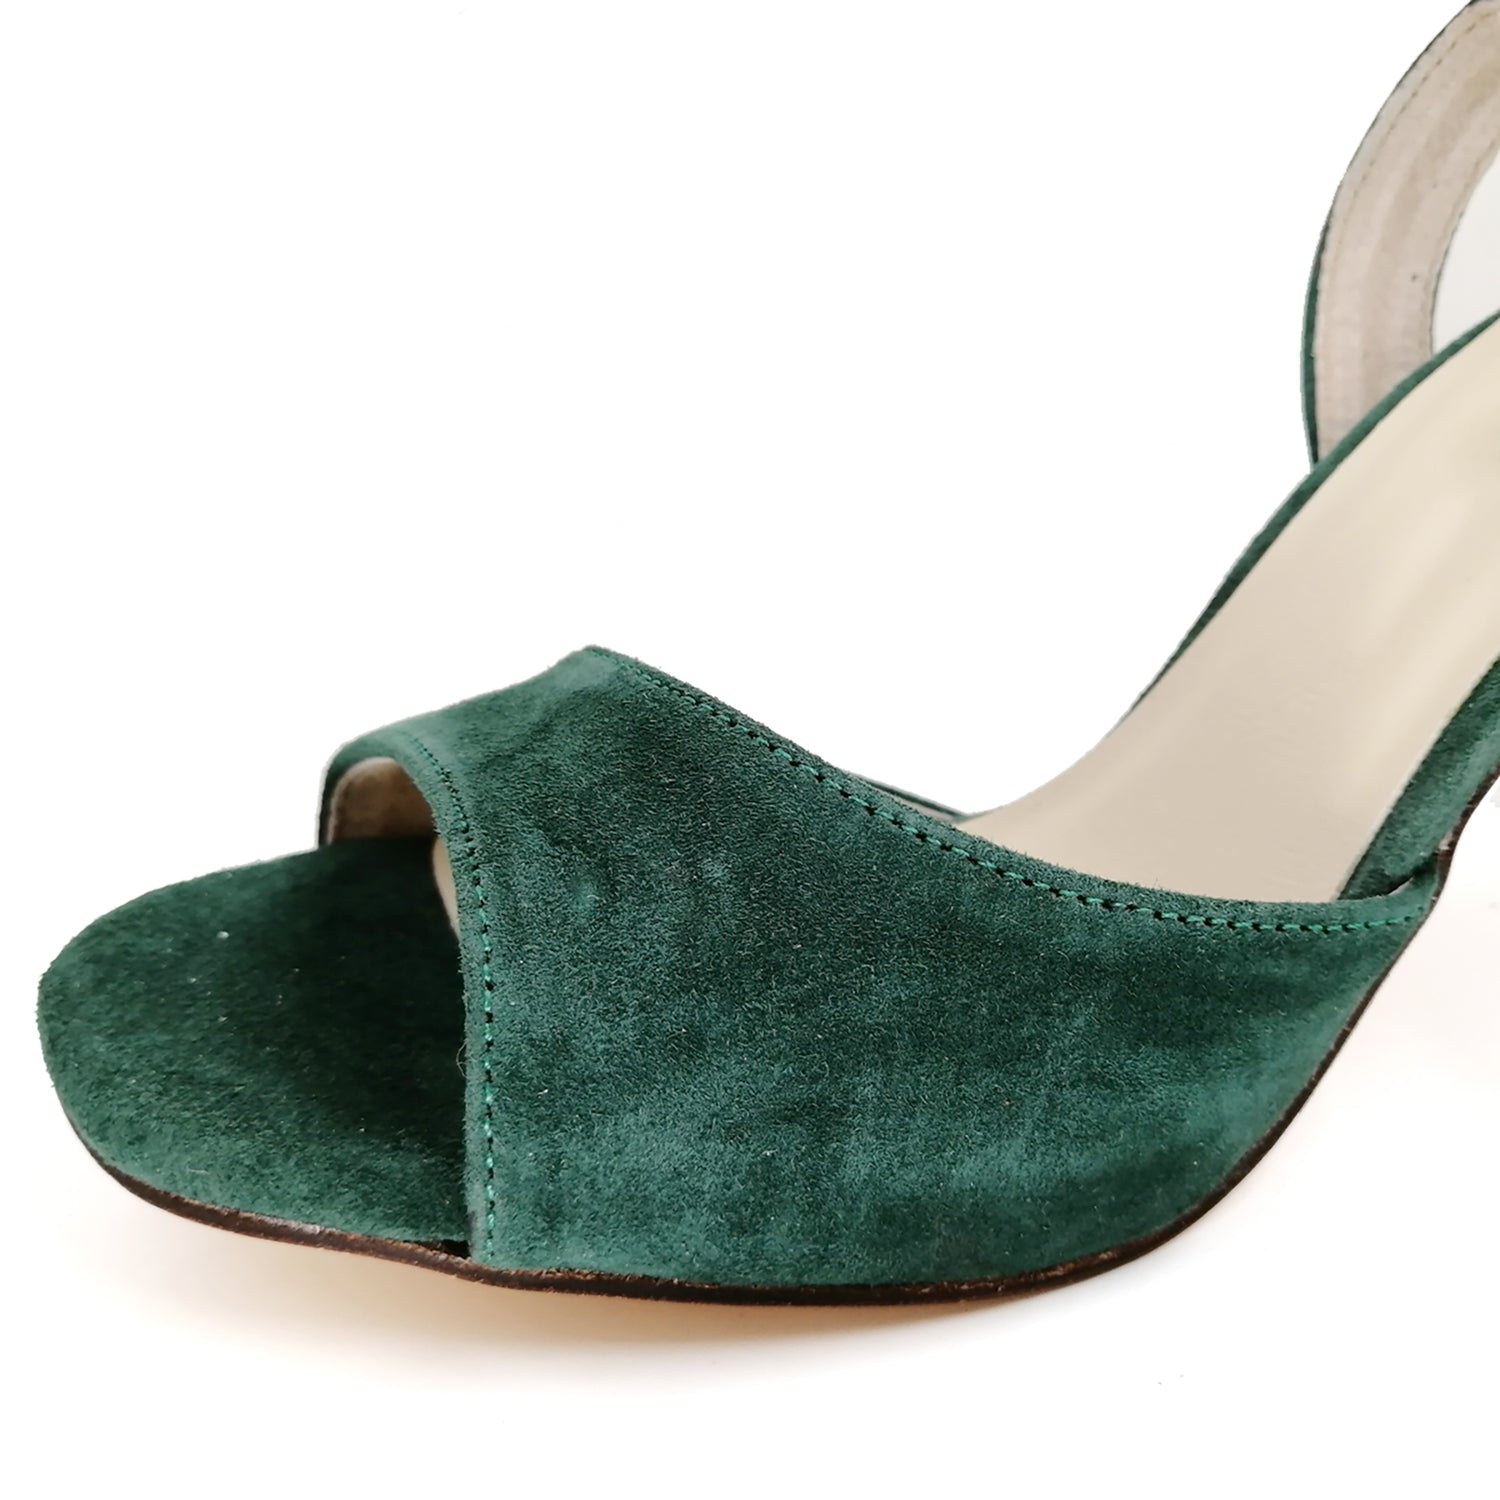 Elegant Pro Dancer Ladies Tango Shoes with High Heel and Leather Sole in Dark Green3